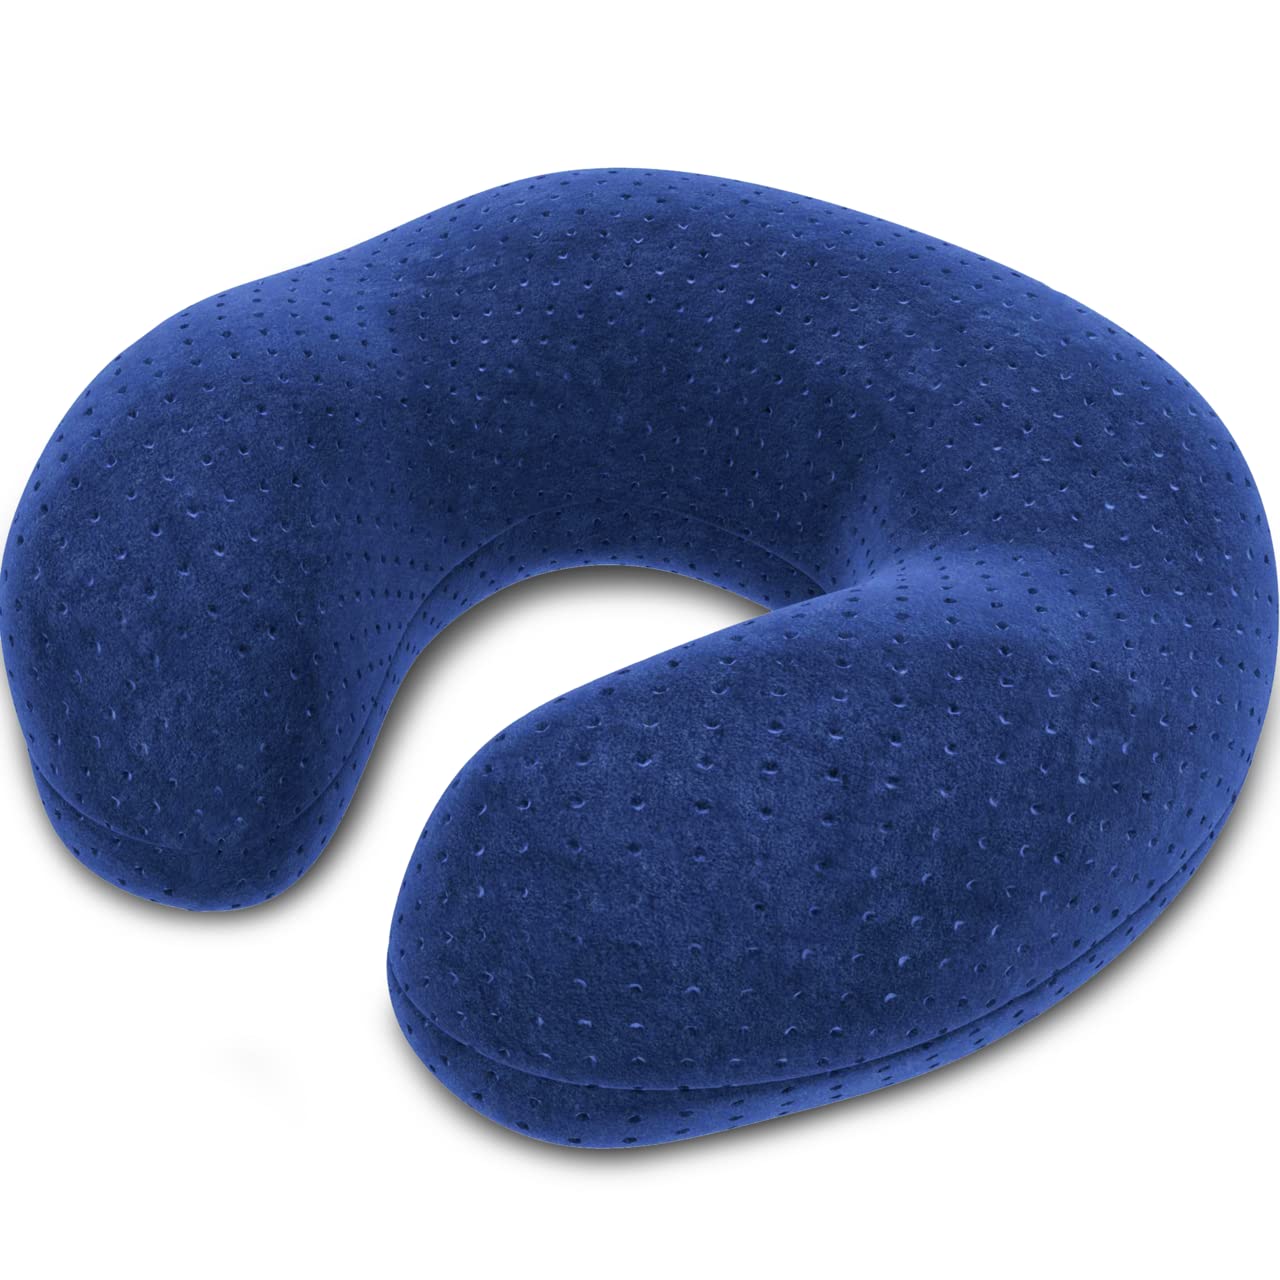 bonmedico Flat Ergonomic Neck Pillow Made from Memory Foam, Flight Pillow, Great as a Cervical Pillow for Home and Office, Travel Pillow for Women and Men, Blue